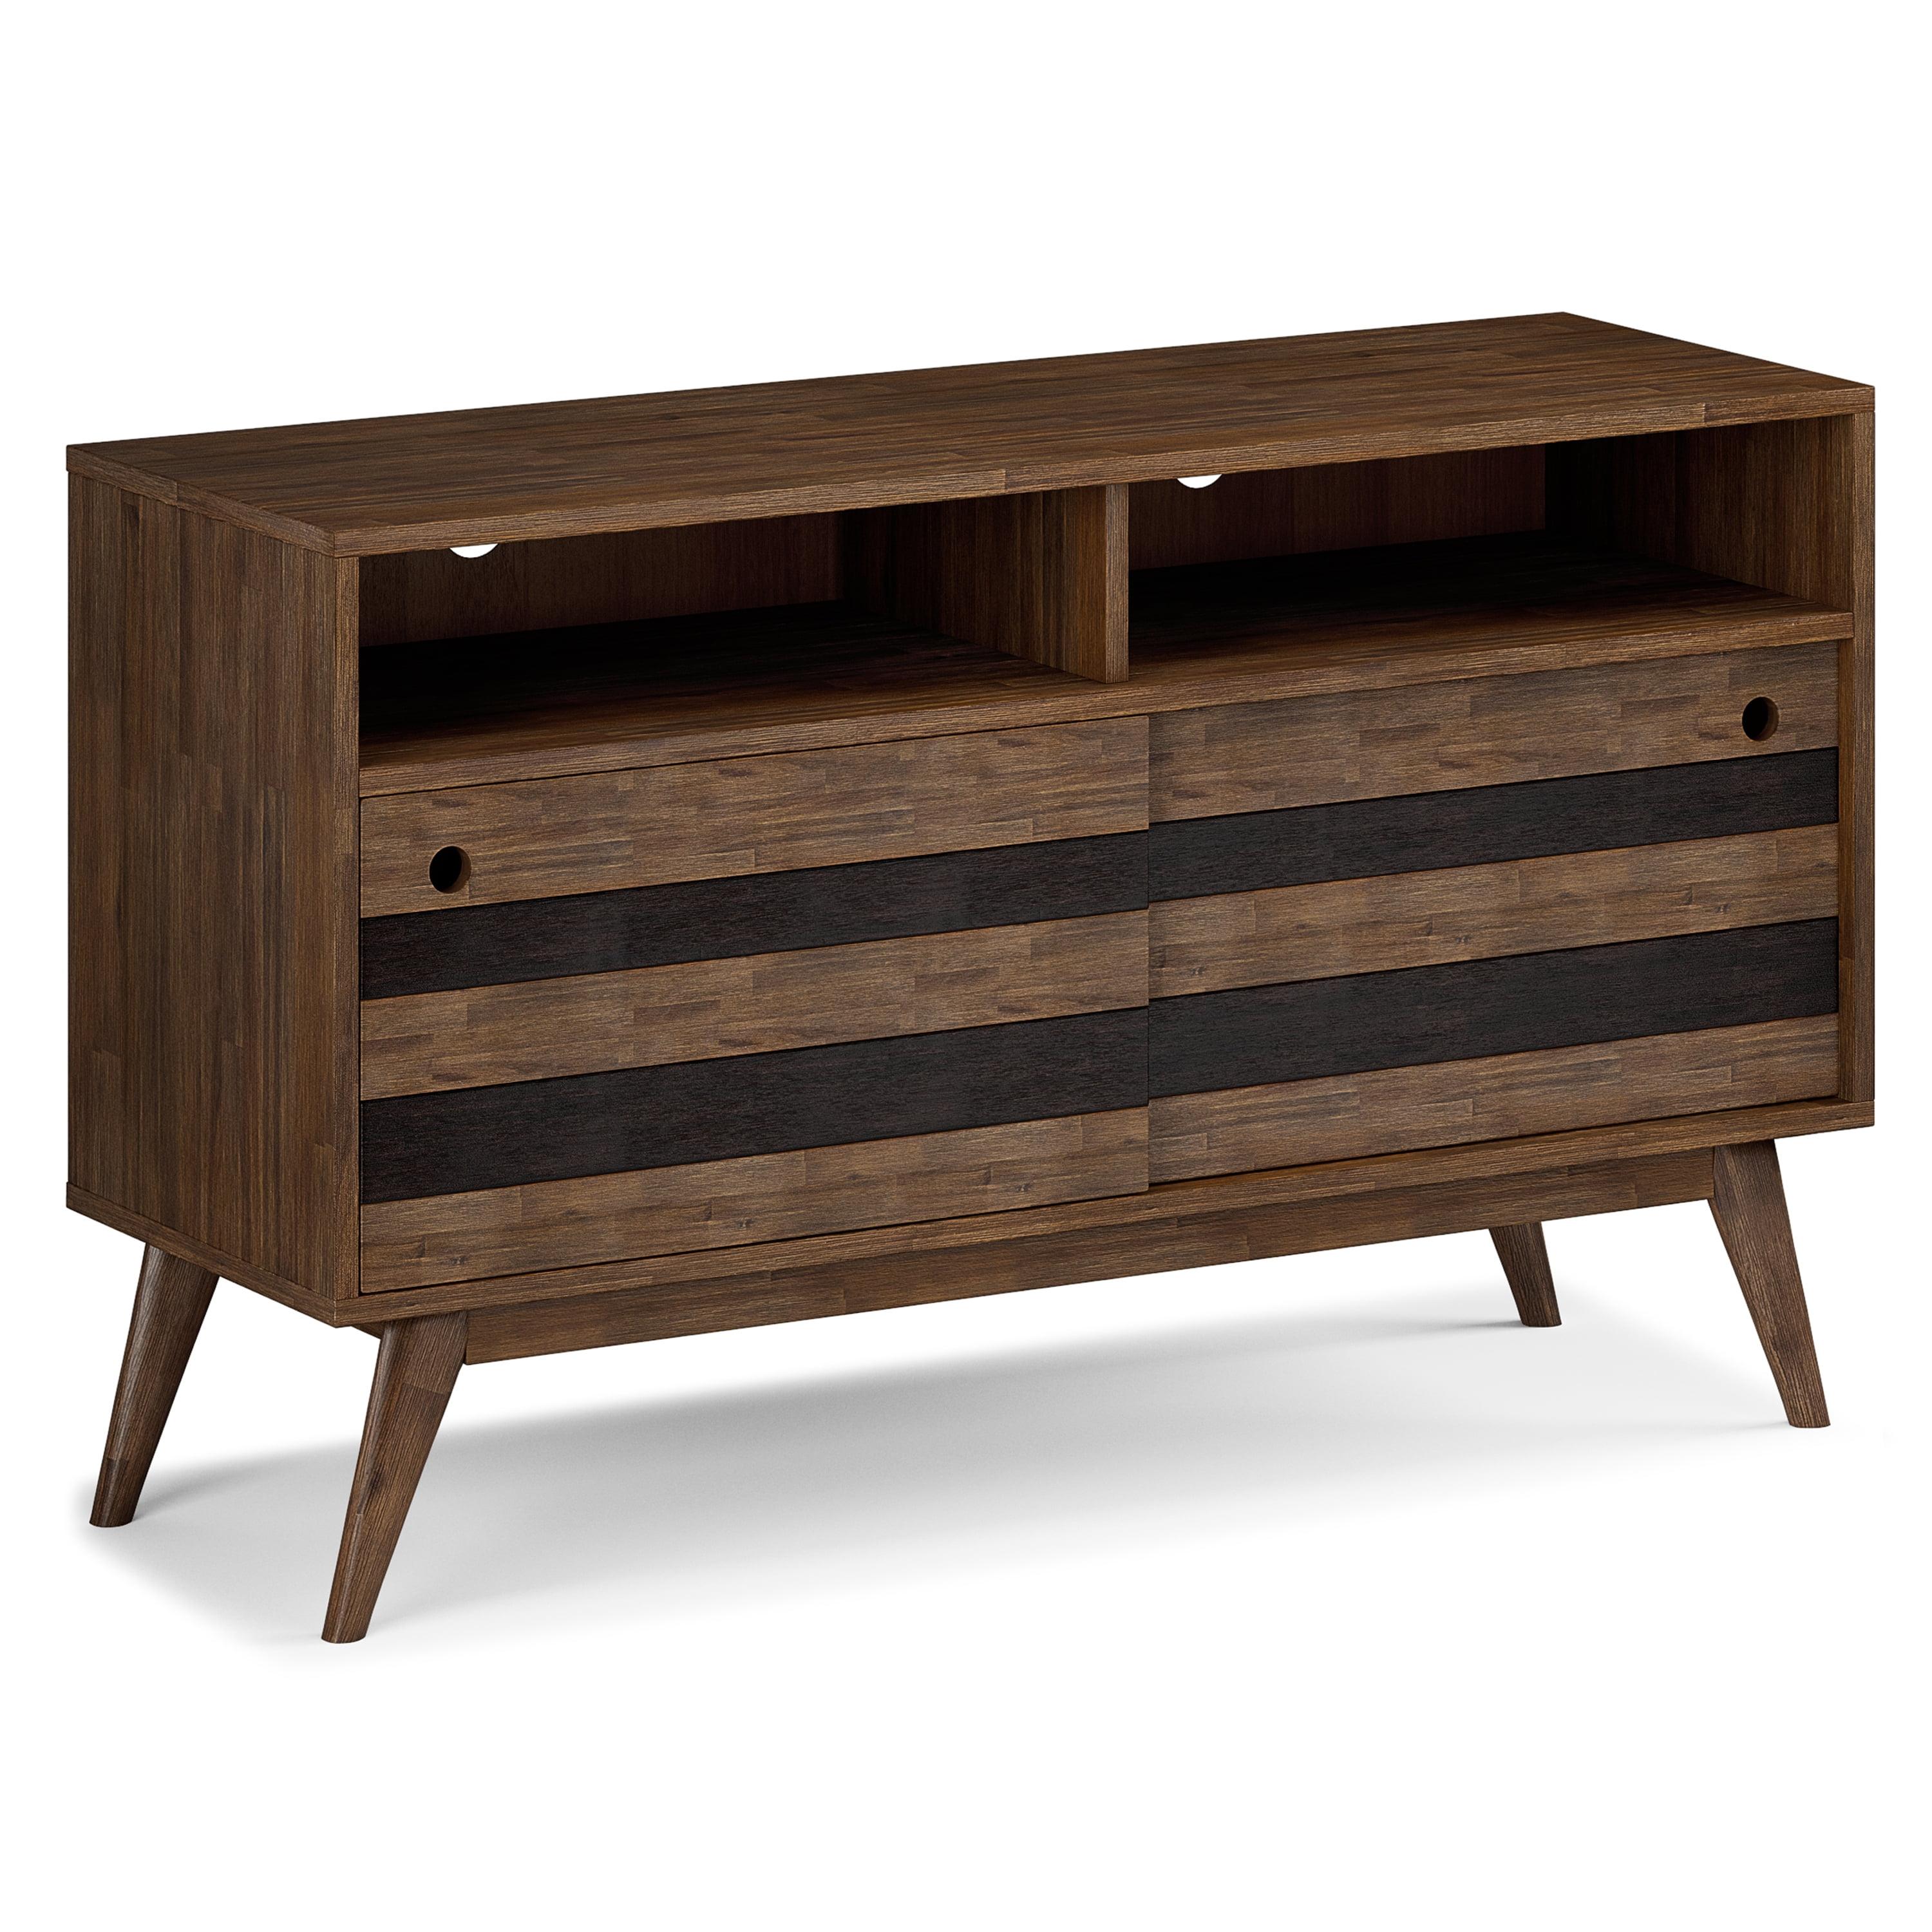 Clarkson 54" Rustic Natural Aged Brown Acacia TV Stand